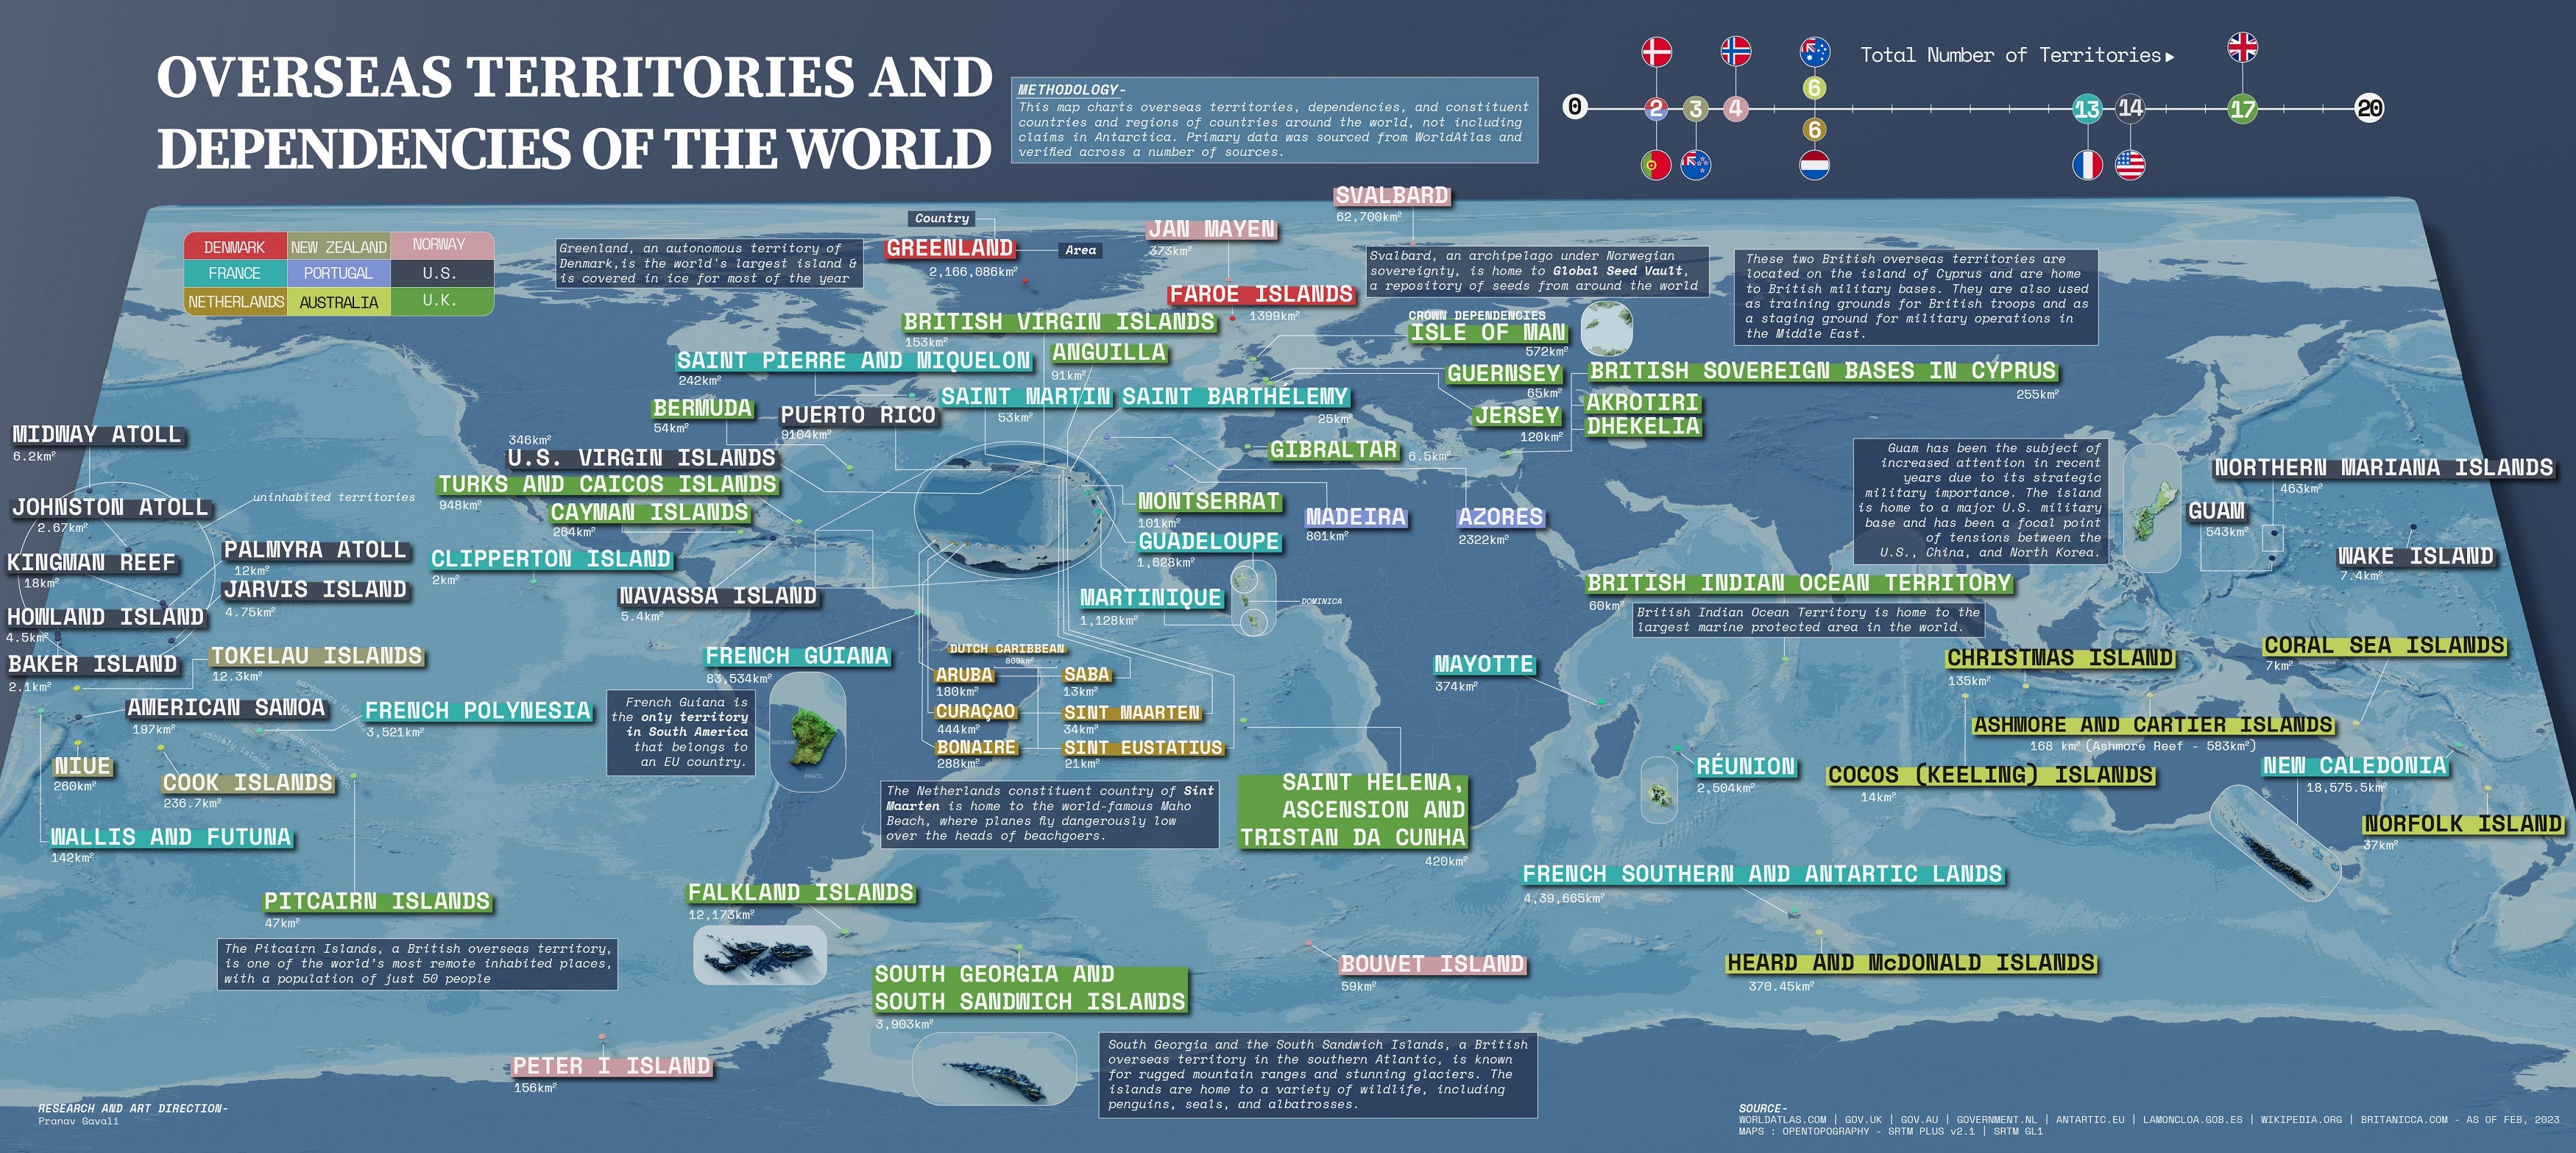 overseas territories and dependencies around the world and their sovereign states.